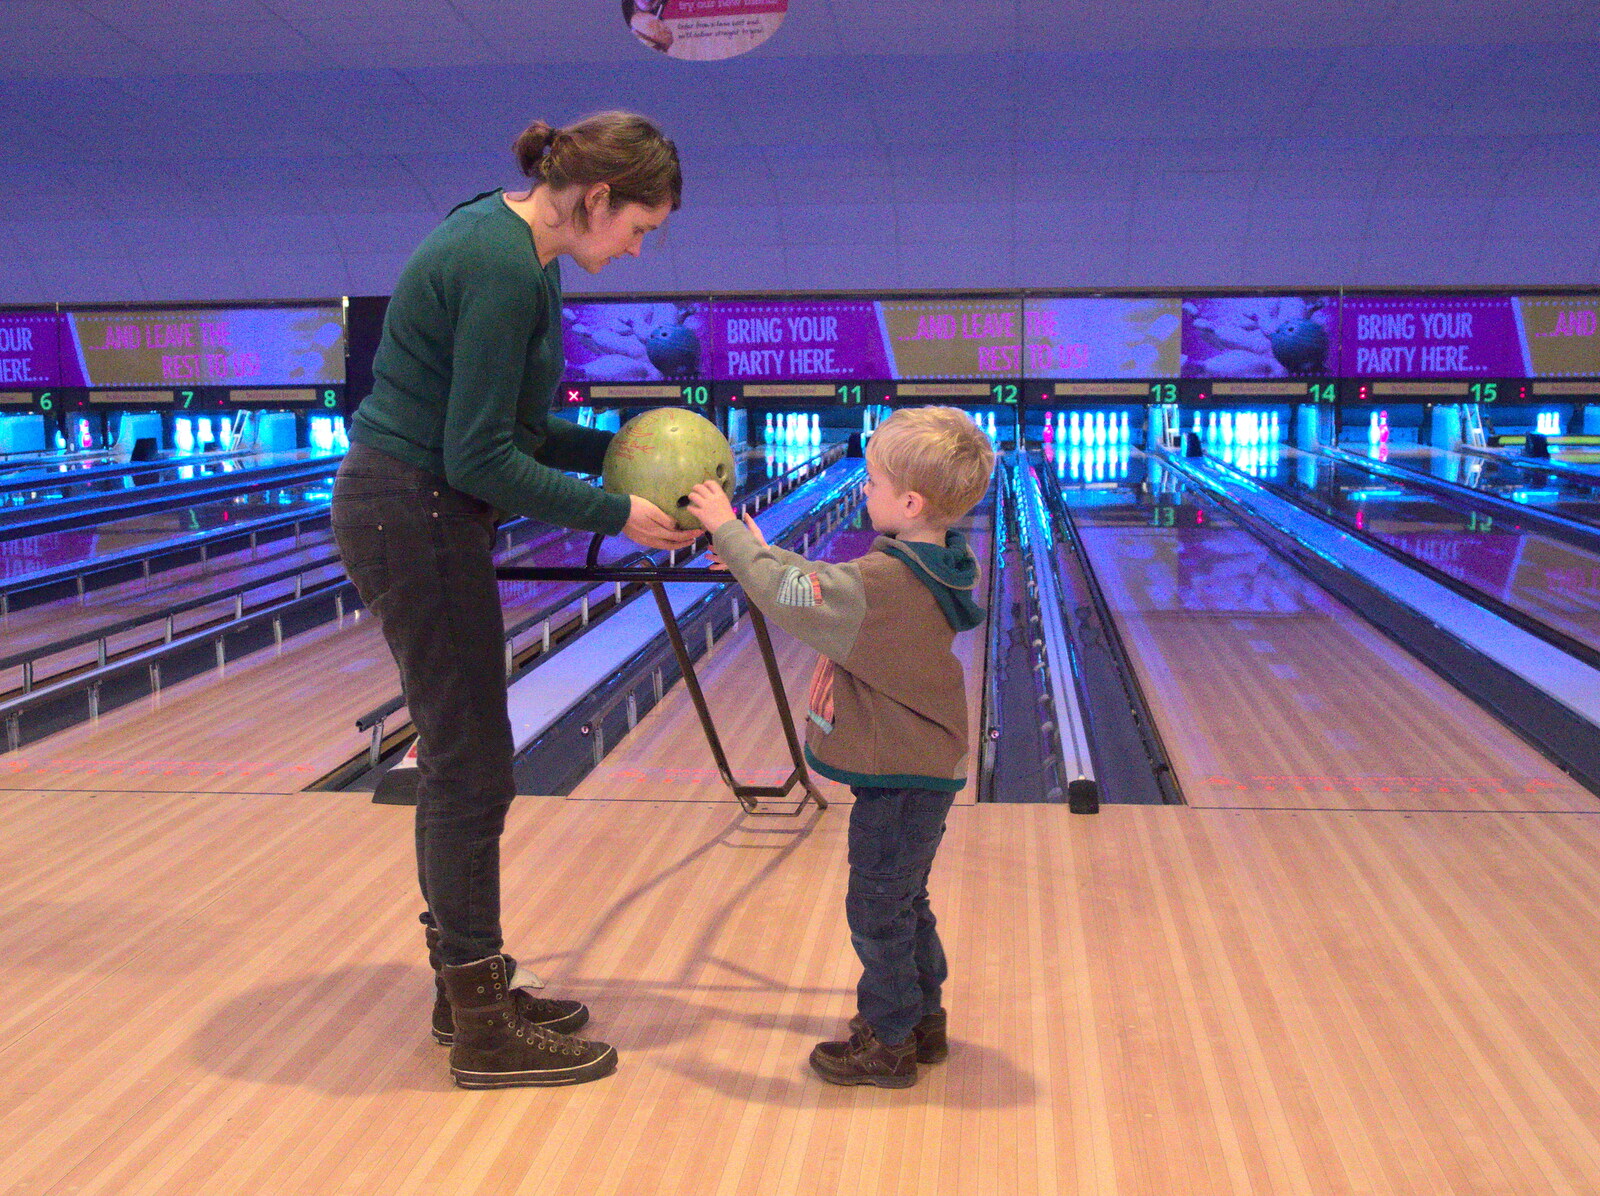 Harry has a go with some assistance from Ten-Pin Bowling, Riverside, Norwich - 3rd January 2016